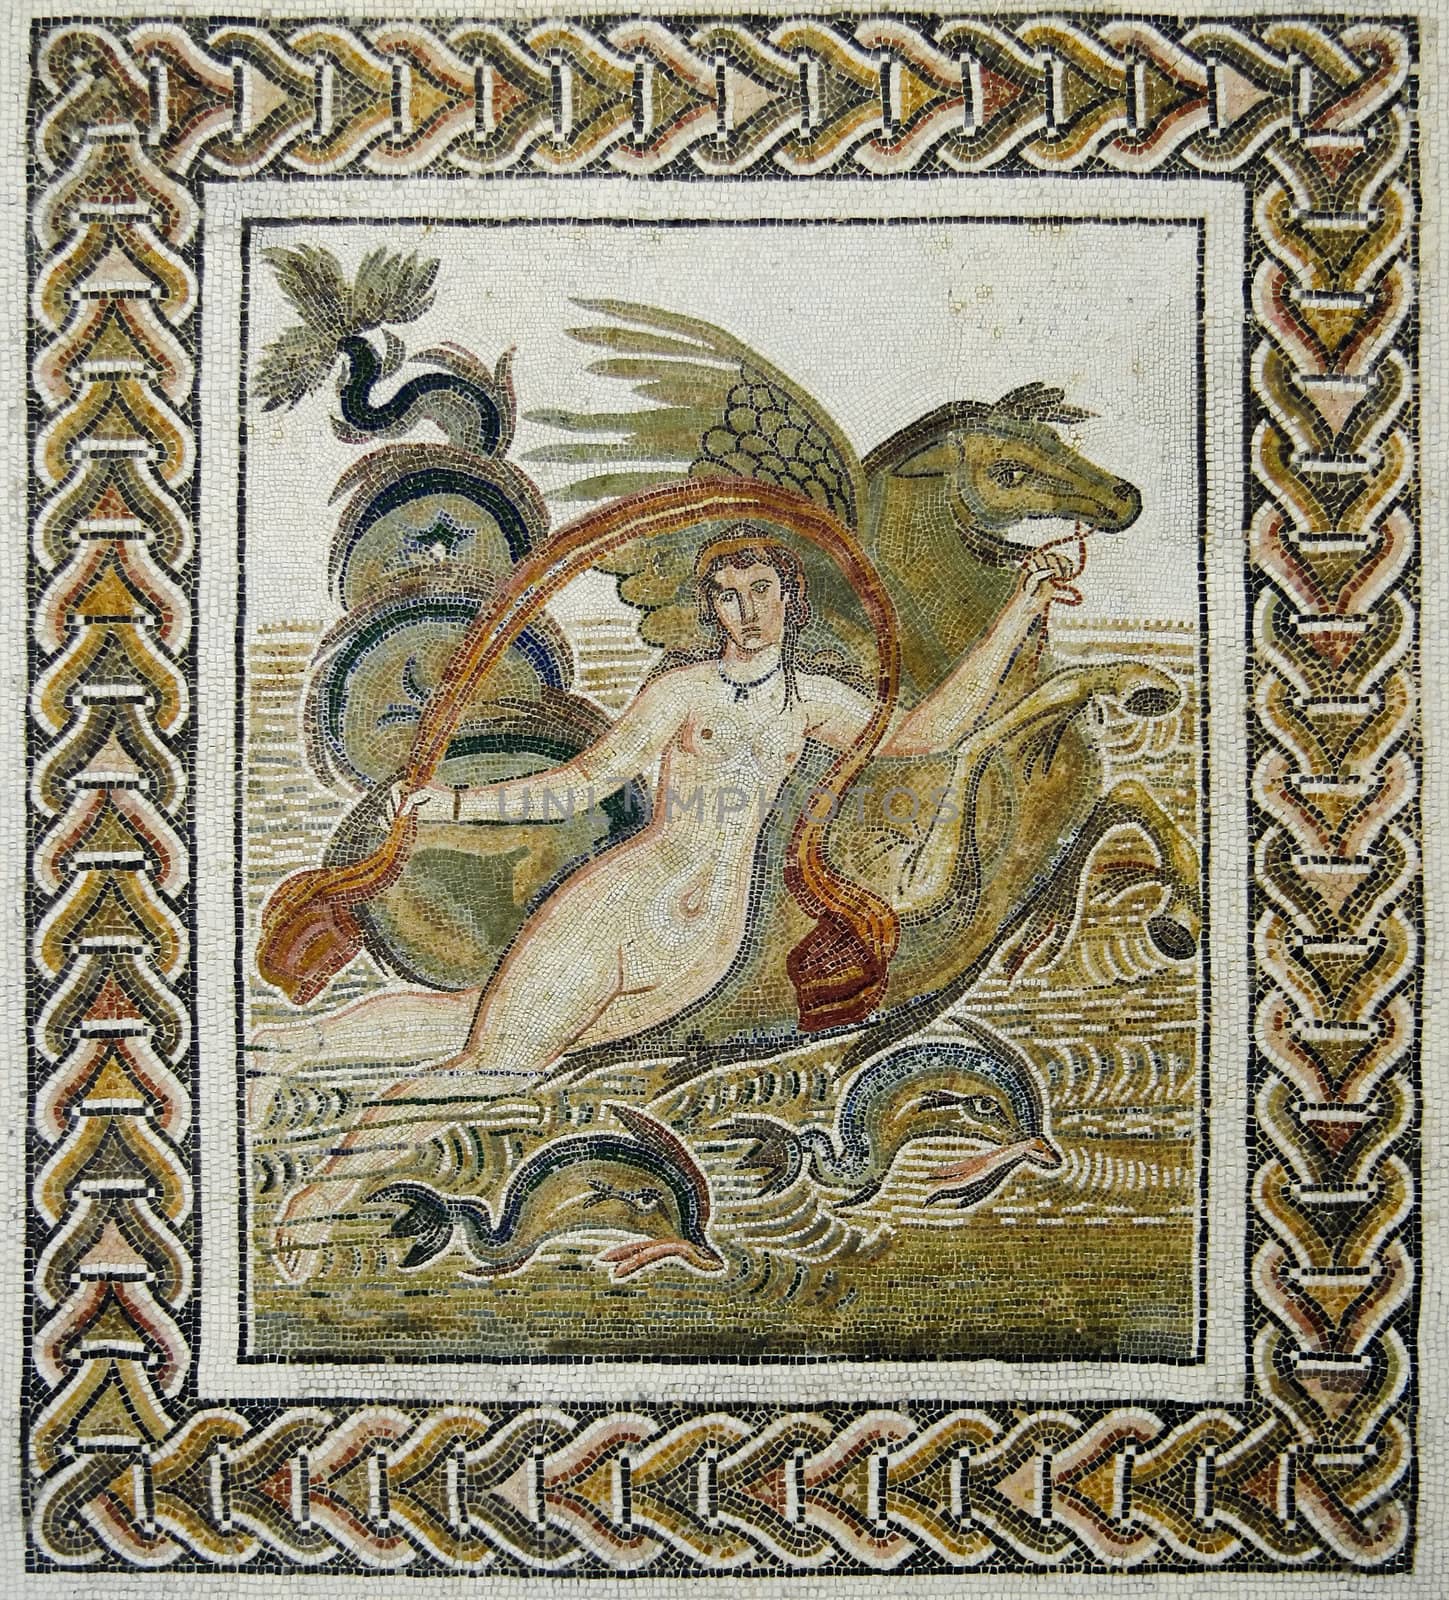 Roman mosaic of the abduction of Europe from the museum of ancient mosaics in Tunisia, El Jem